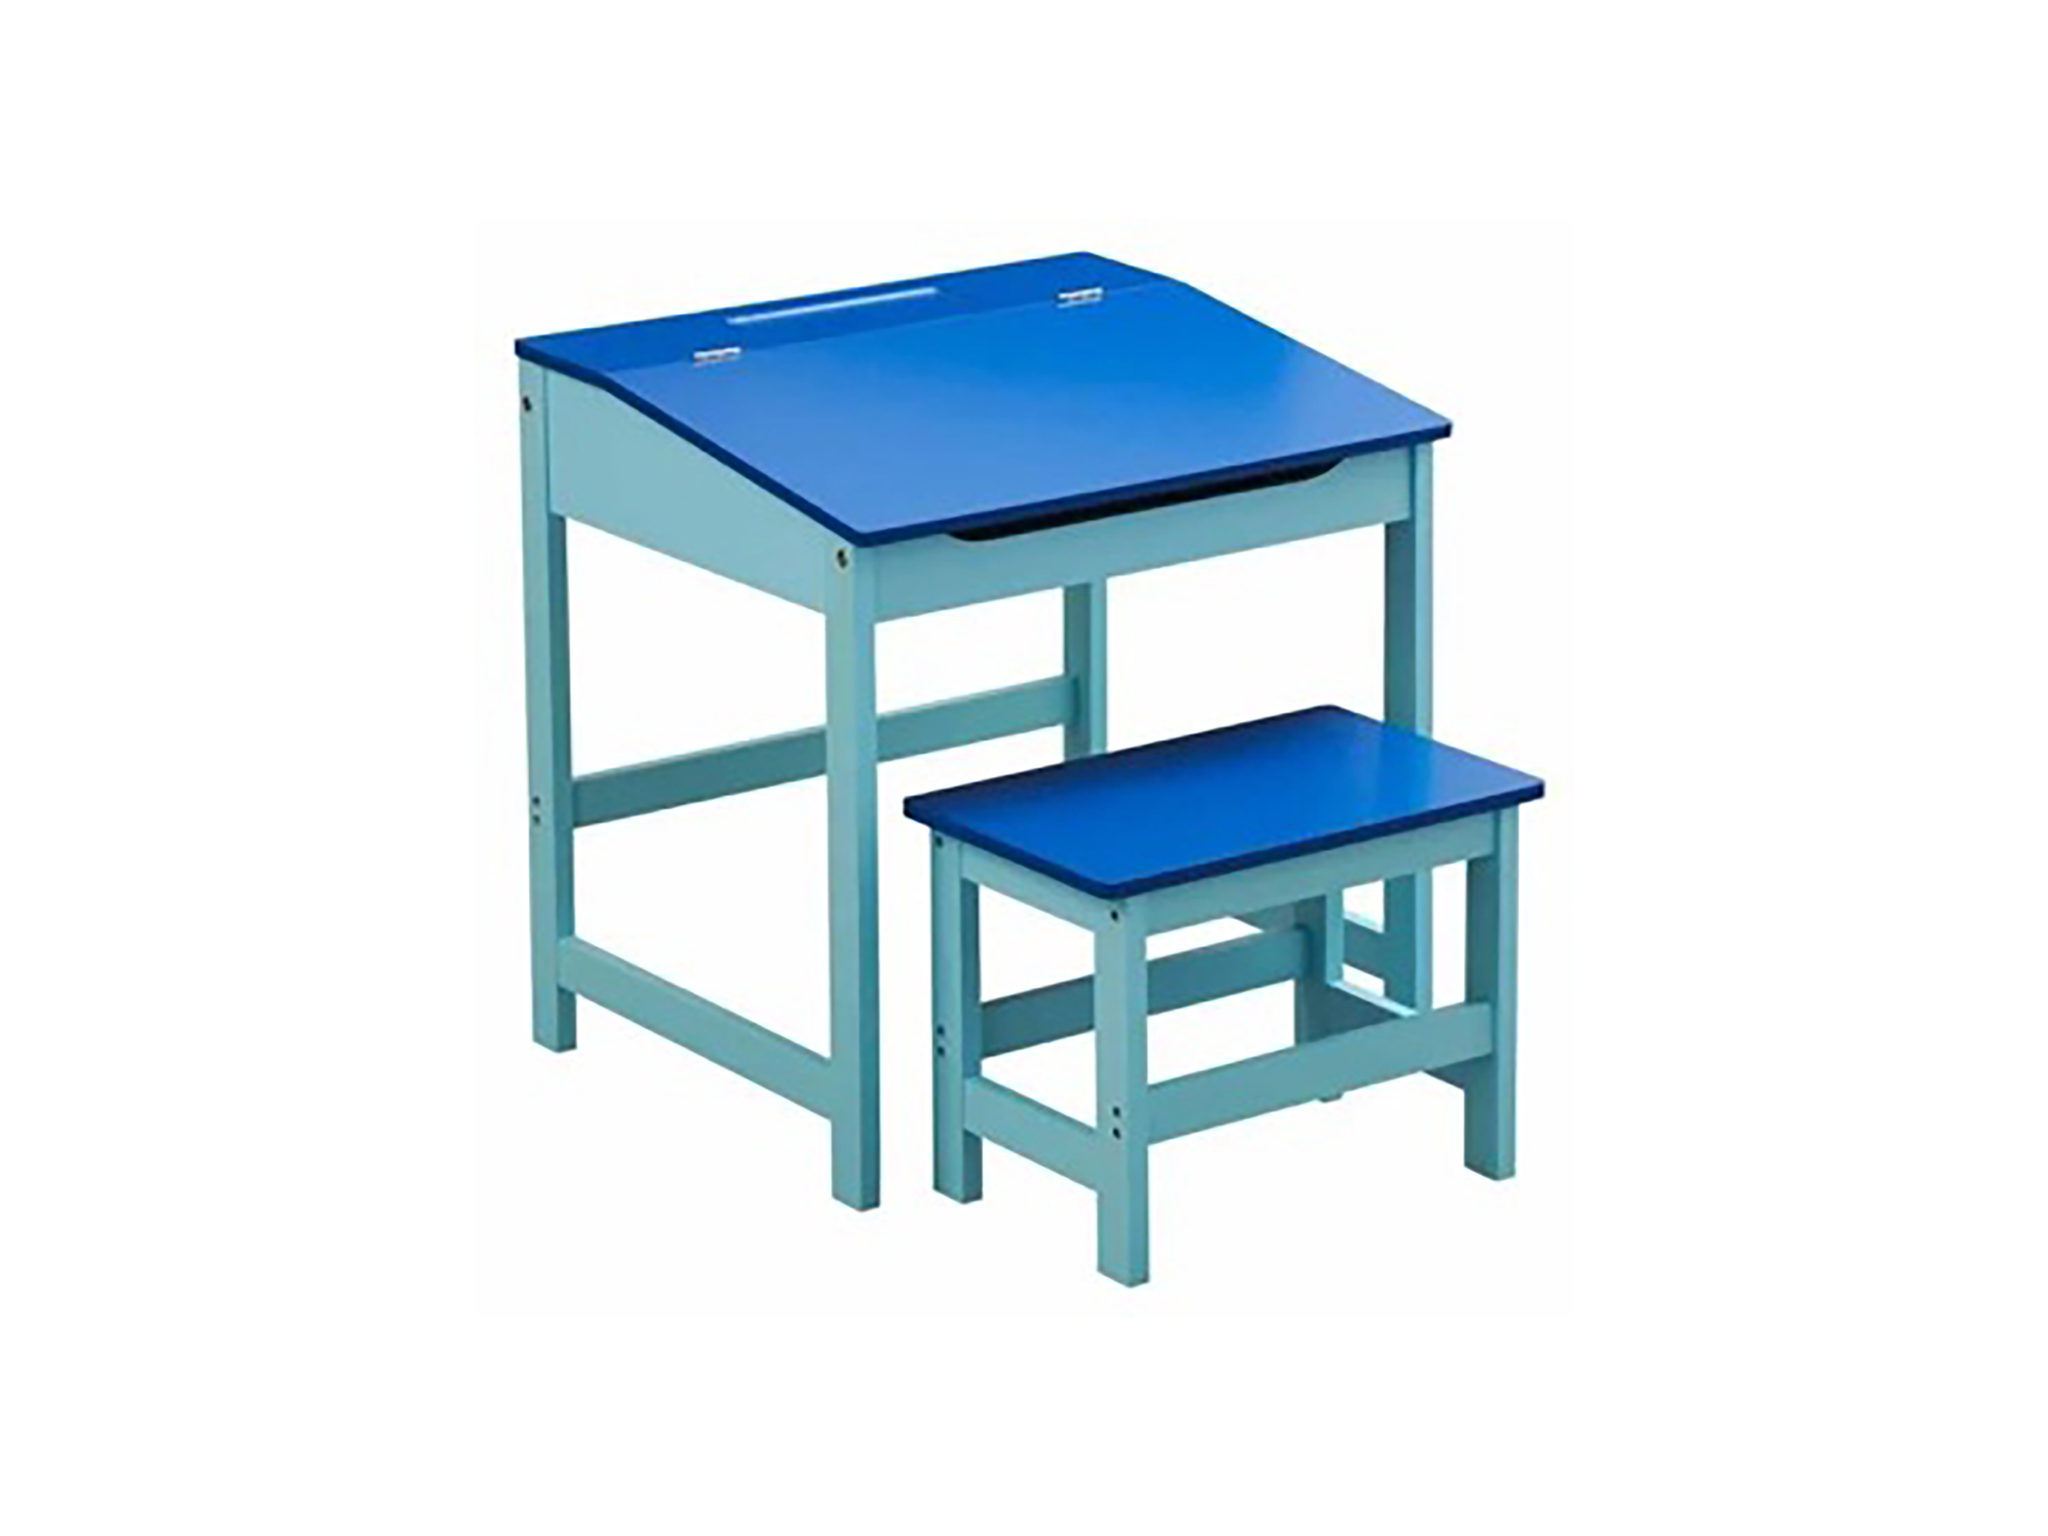 Interiors by PH children’s desk and stool set